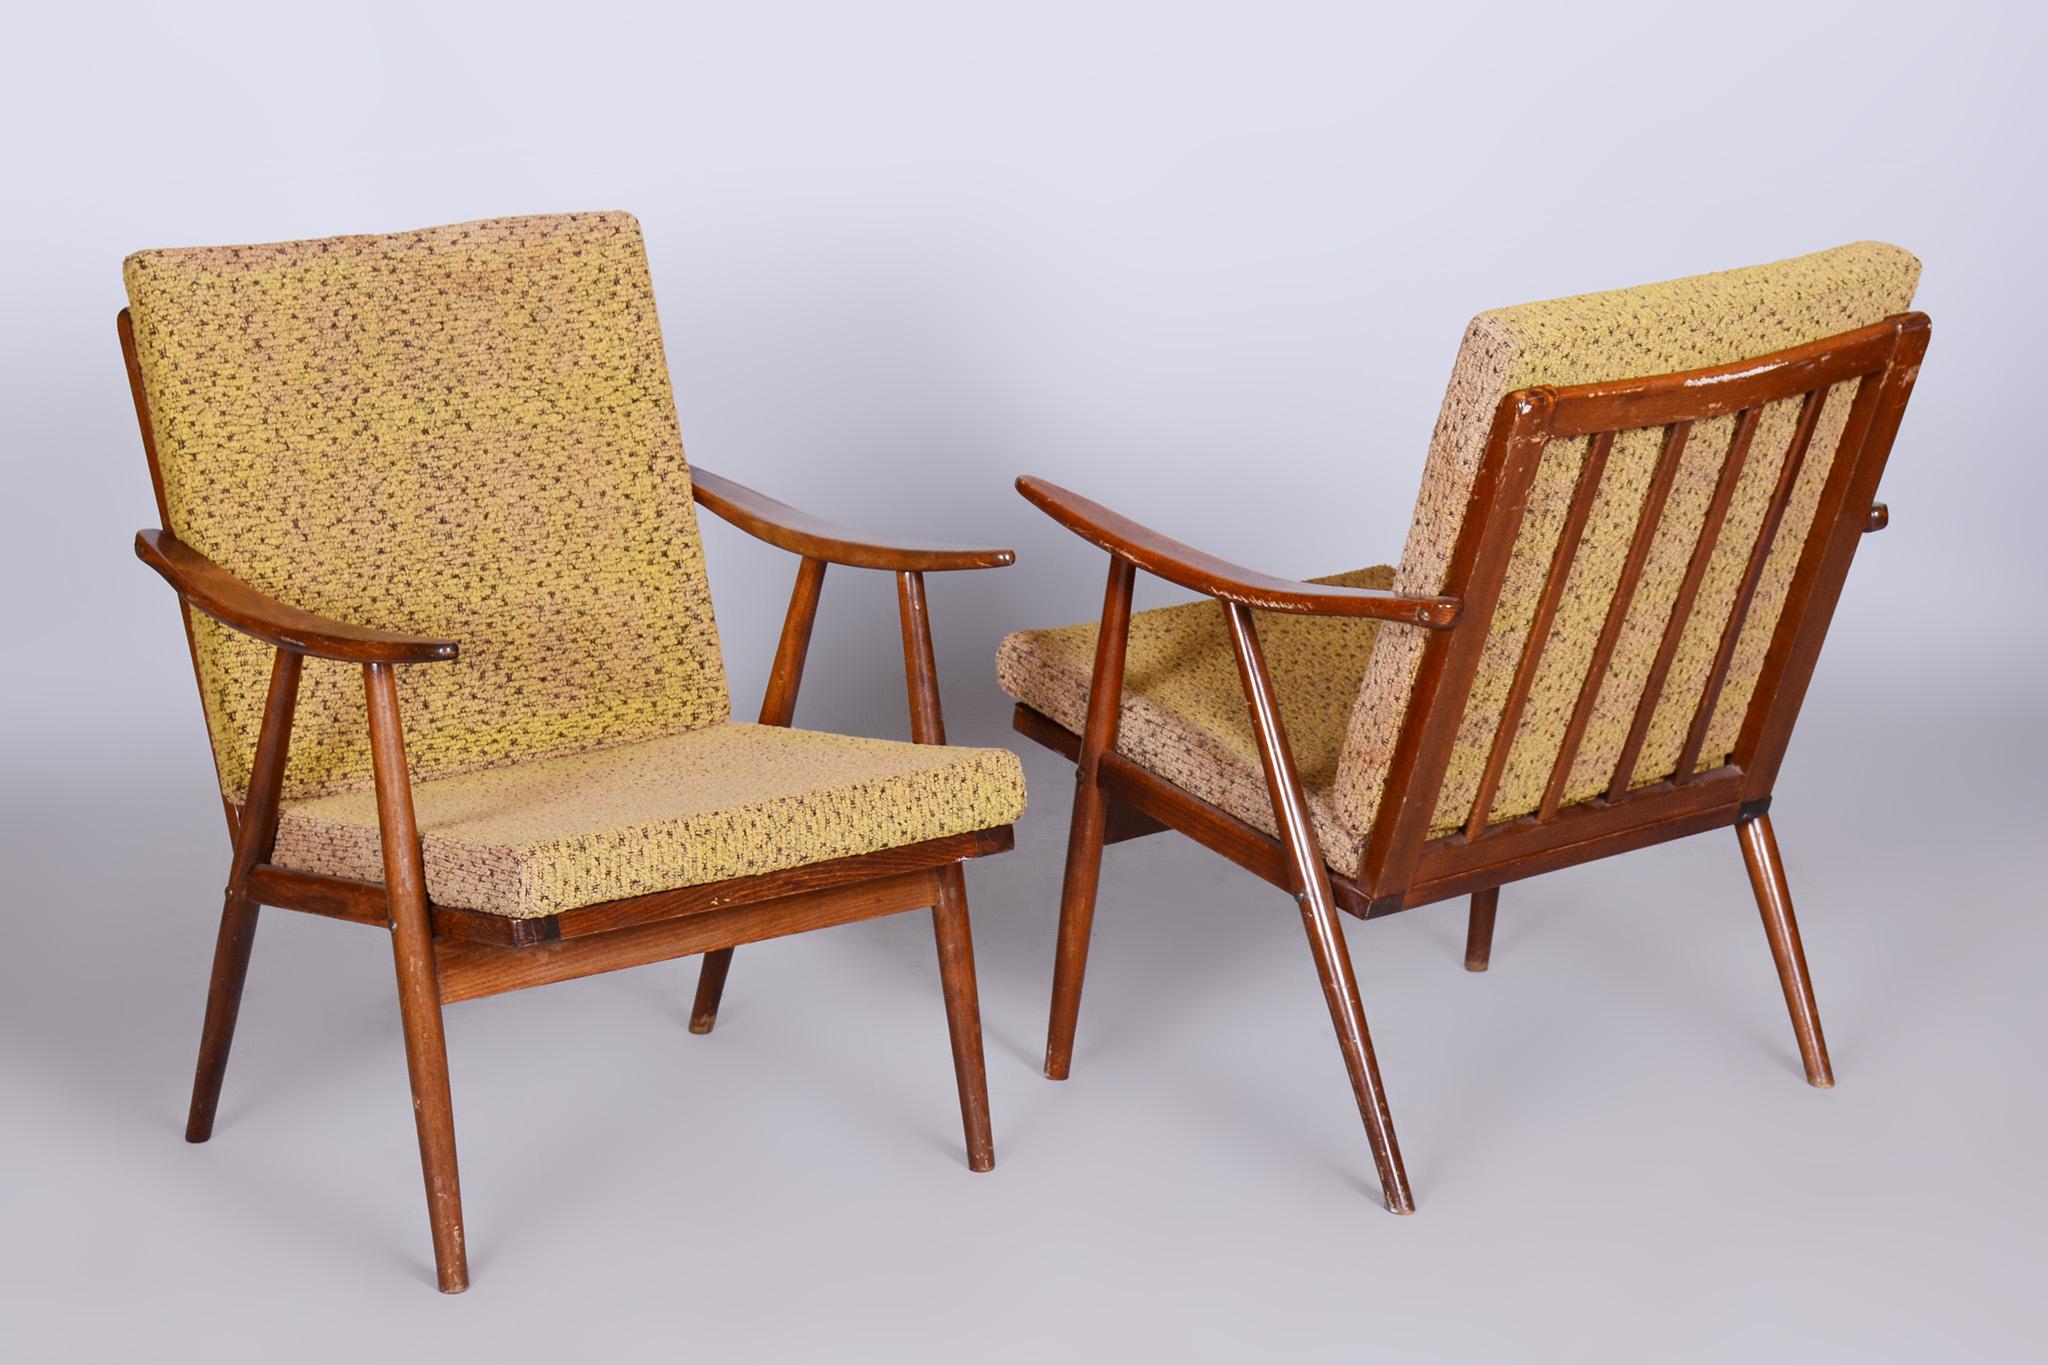 Pair of Midcentury Beech Armchairs, Úluv, Revived Polish, Czechia, 1960s For Sale 5